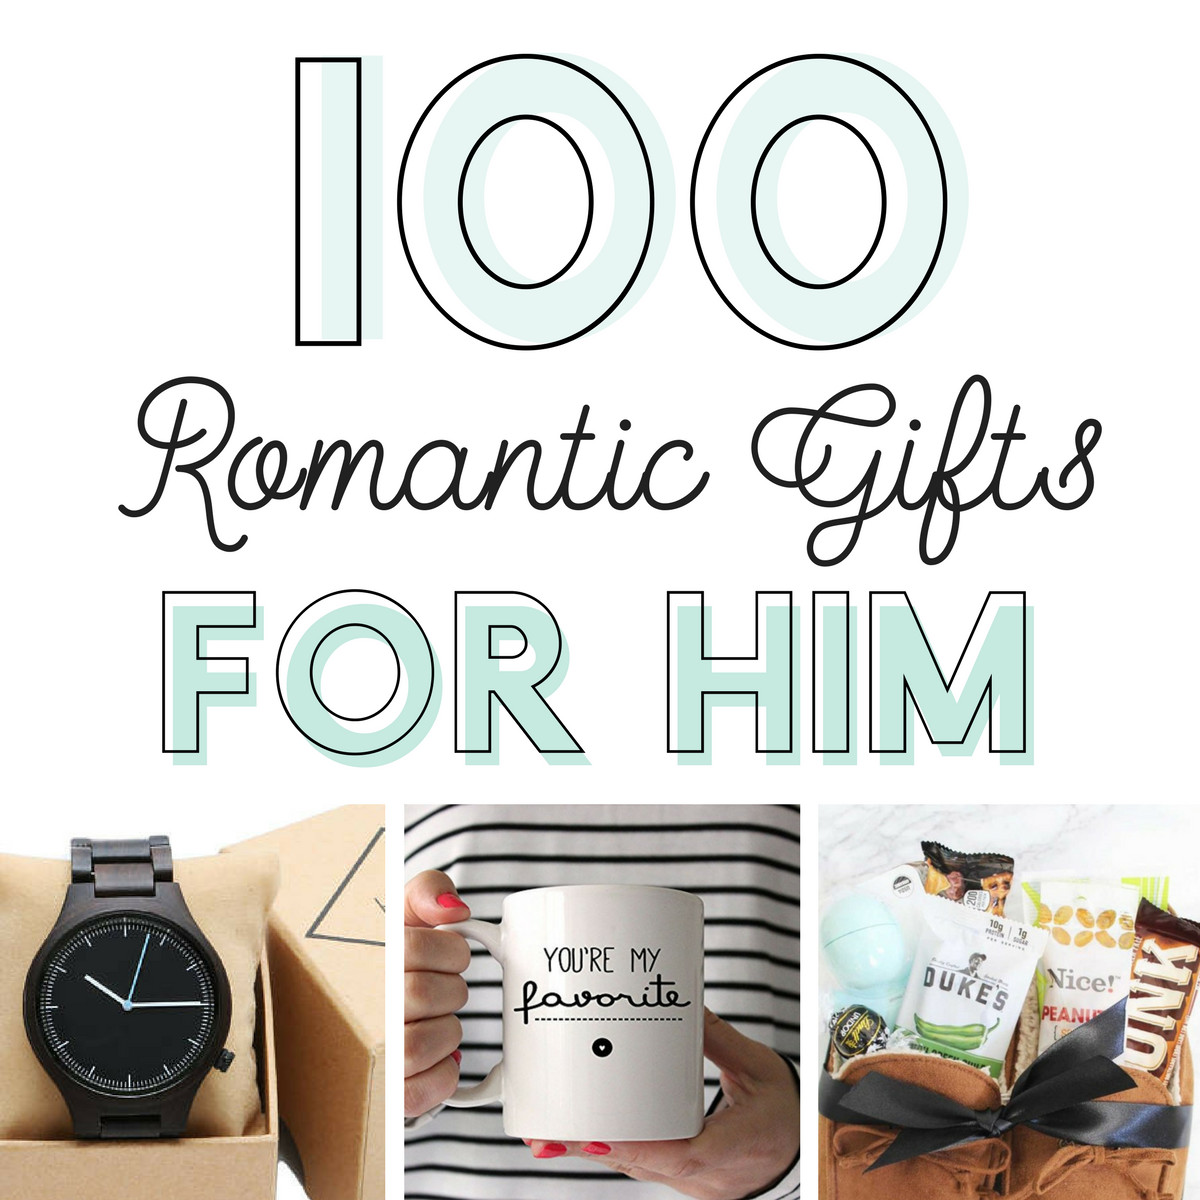 Romantic Birthday Gift Ideas For Him
 100 Romantic Gifts for Him From The Dating Divas